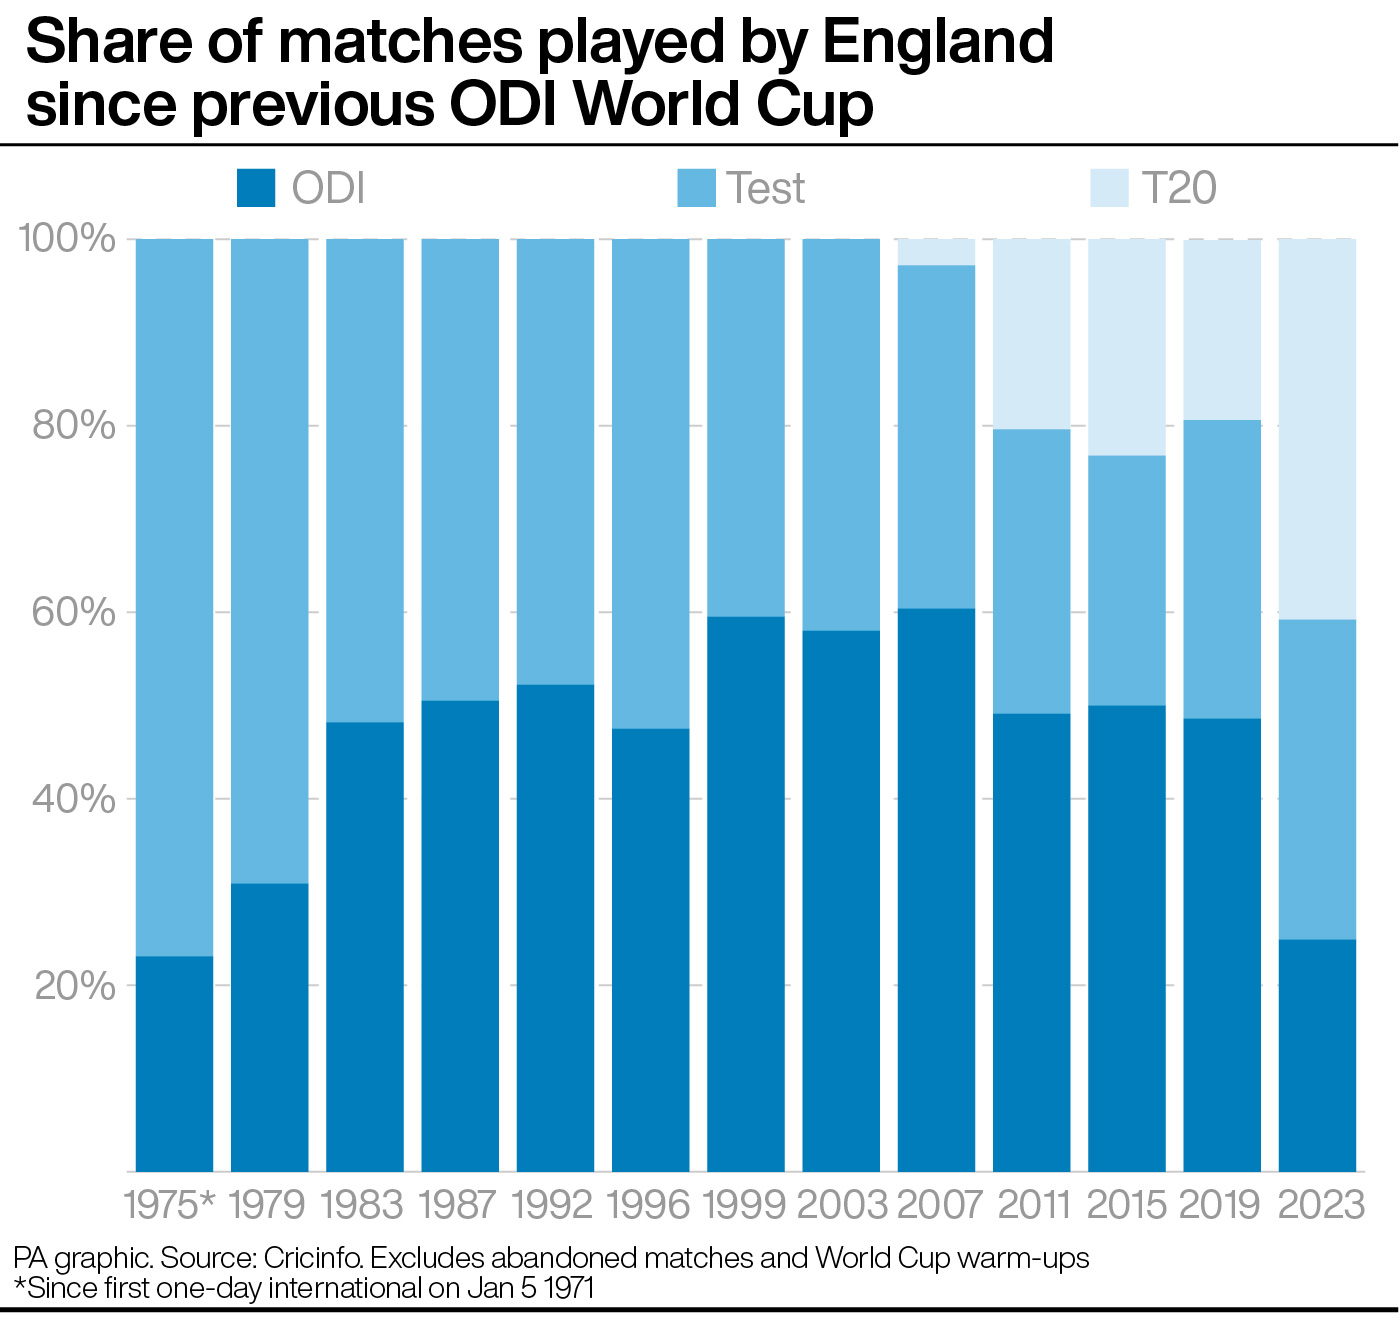 Share of England's matches by format in each ODI World Cup cycle